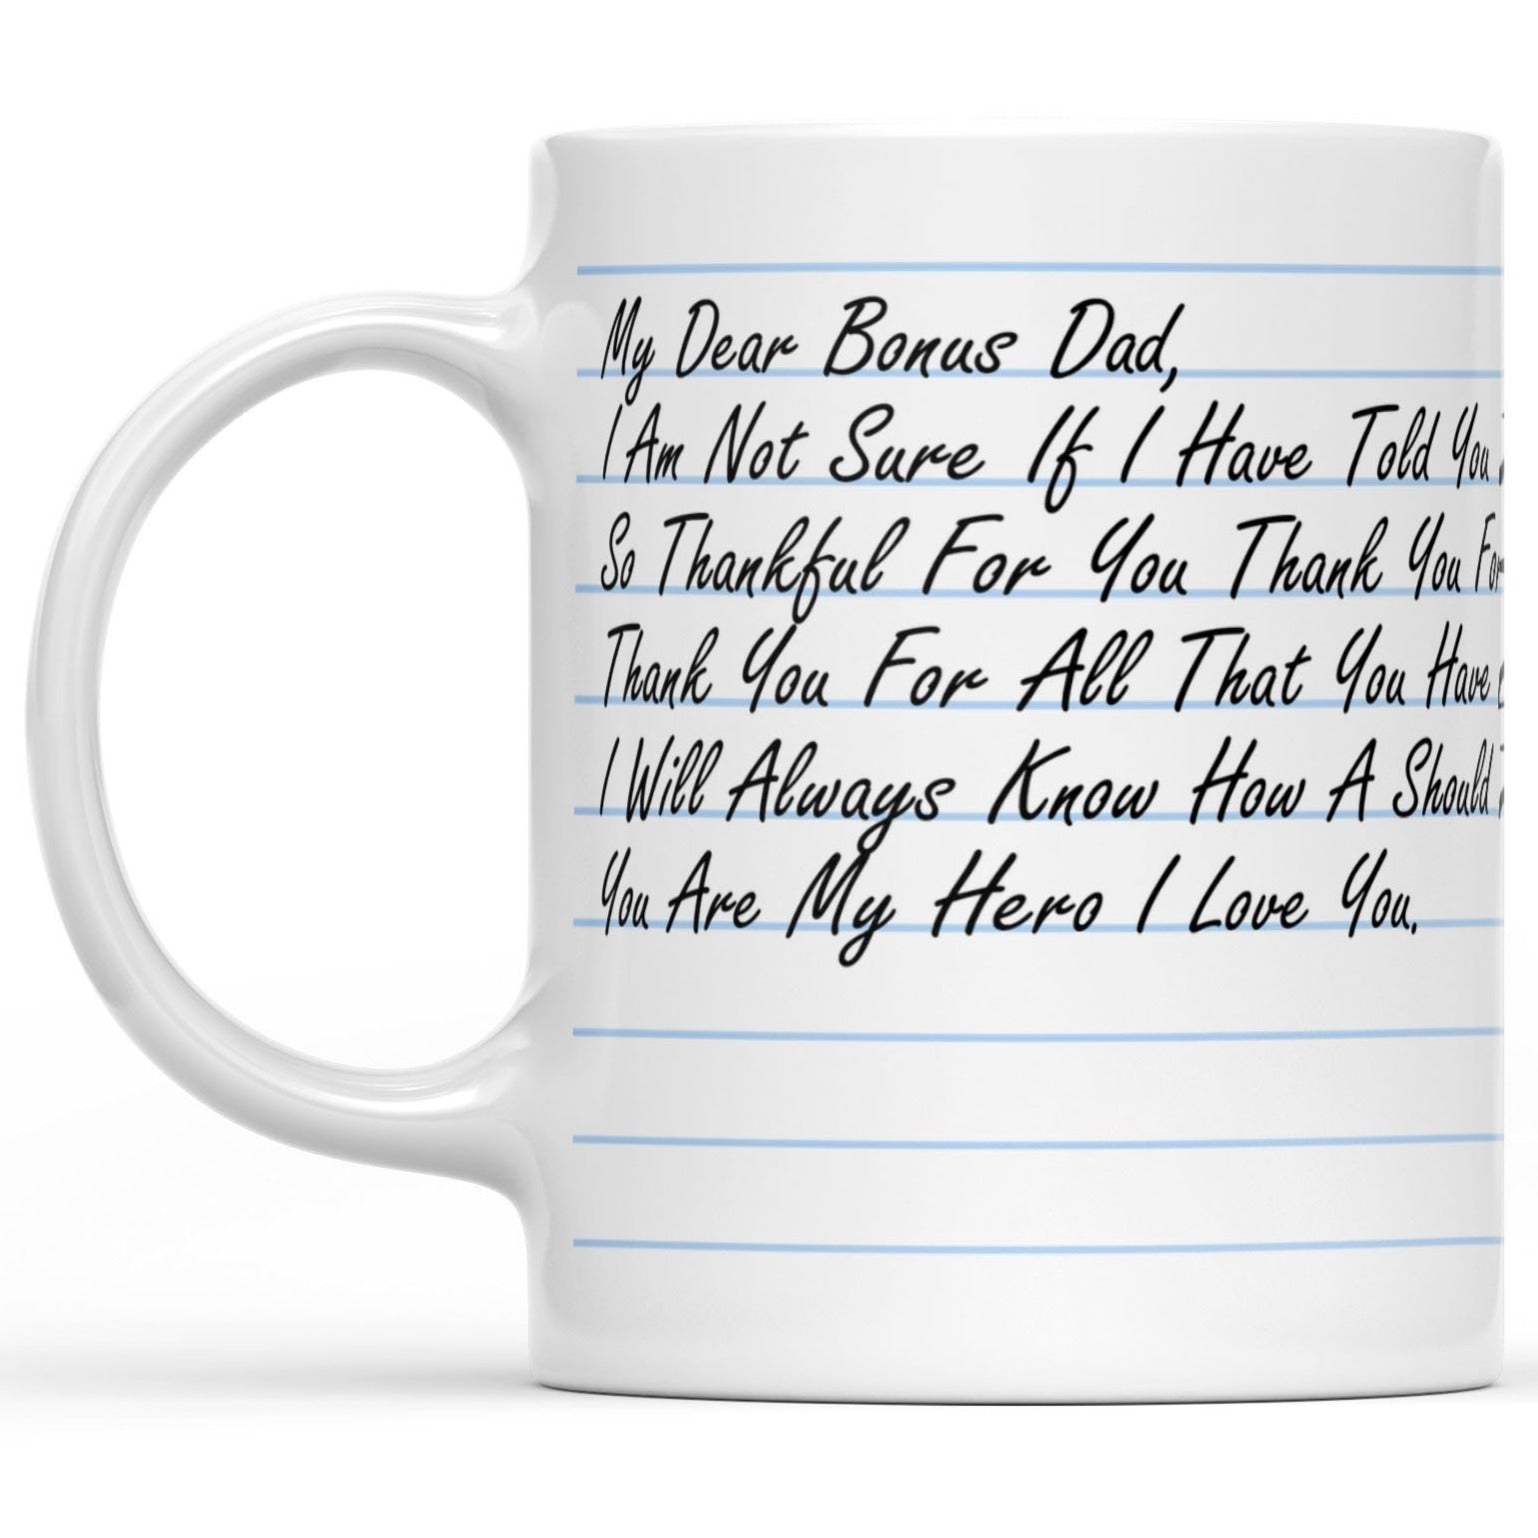 Custom Message Letter for Step Dad Fathers Day Mug Gift Ideas, Personalized Mug for Bonus Dad from Son